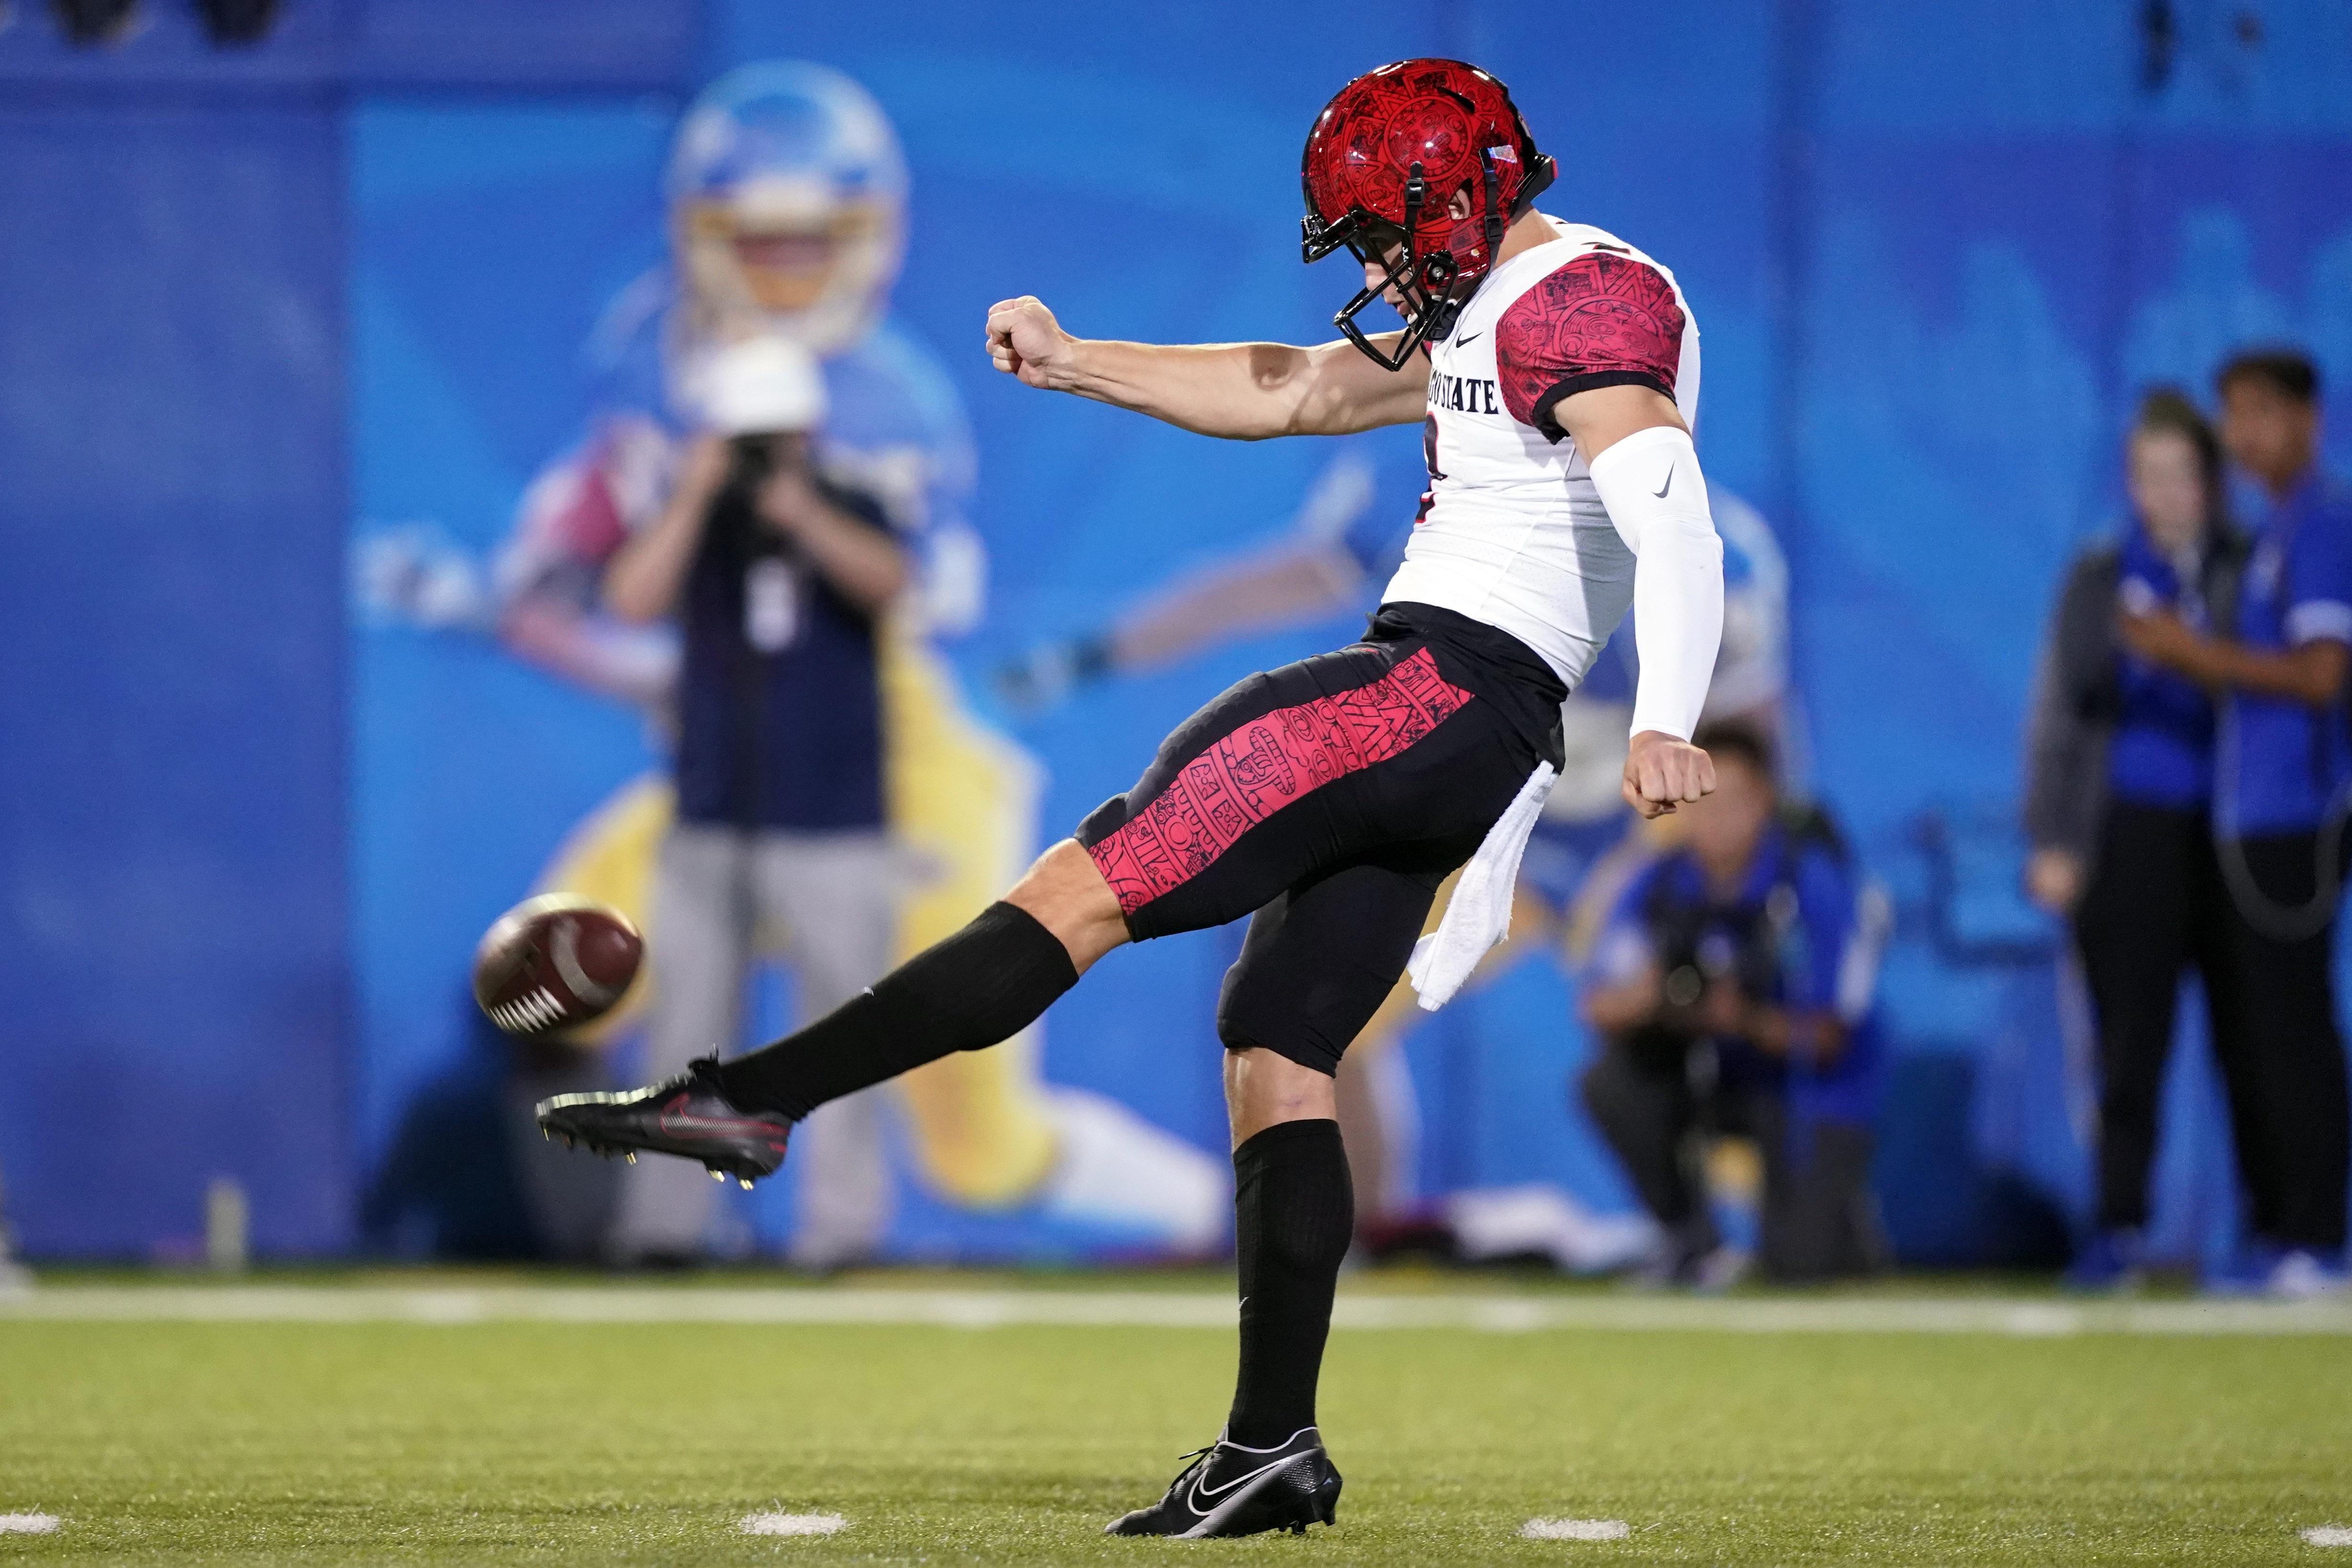 2022 NFL Draft: Matt Araiza Highlights, Punting Stats, Scouting Report and Nickname for the 'Punt God'